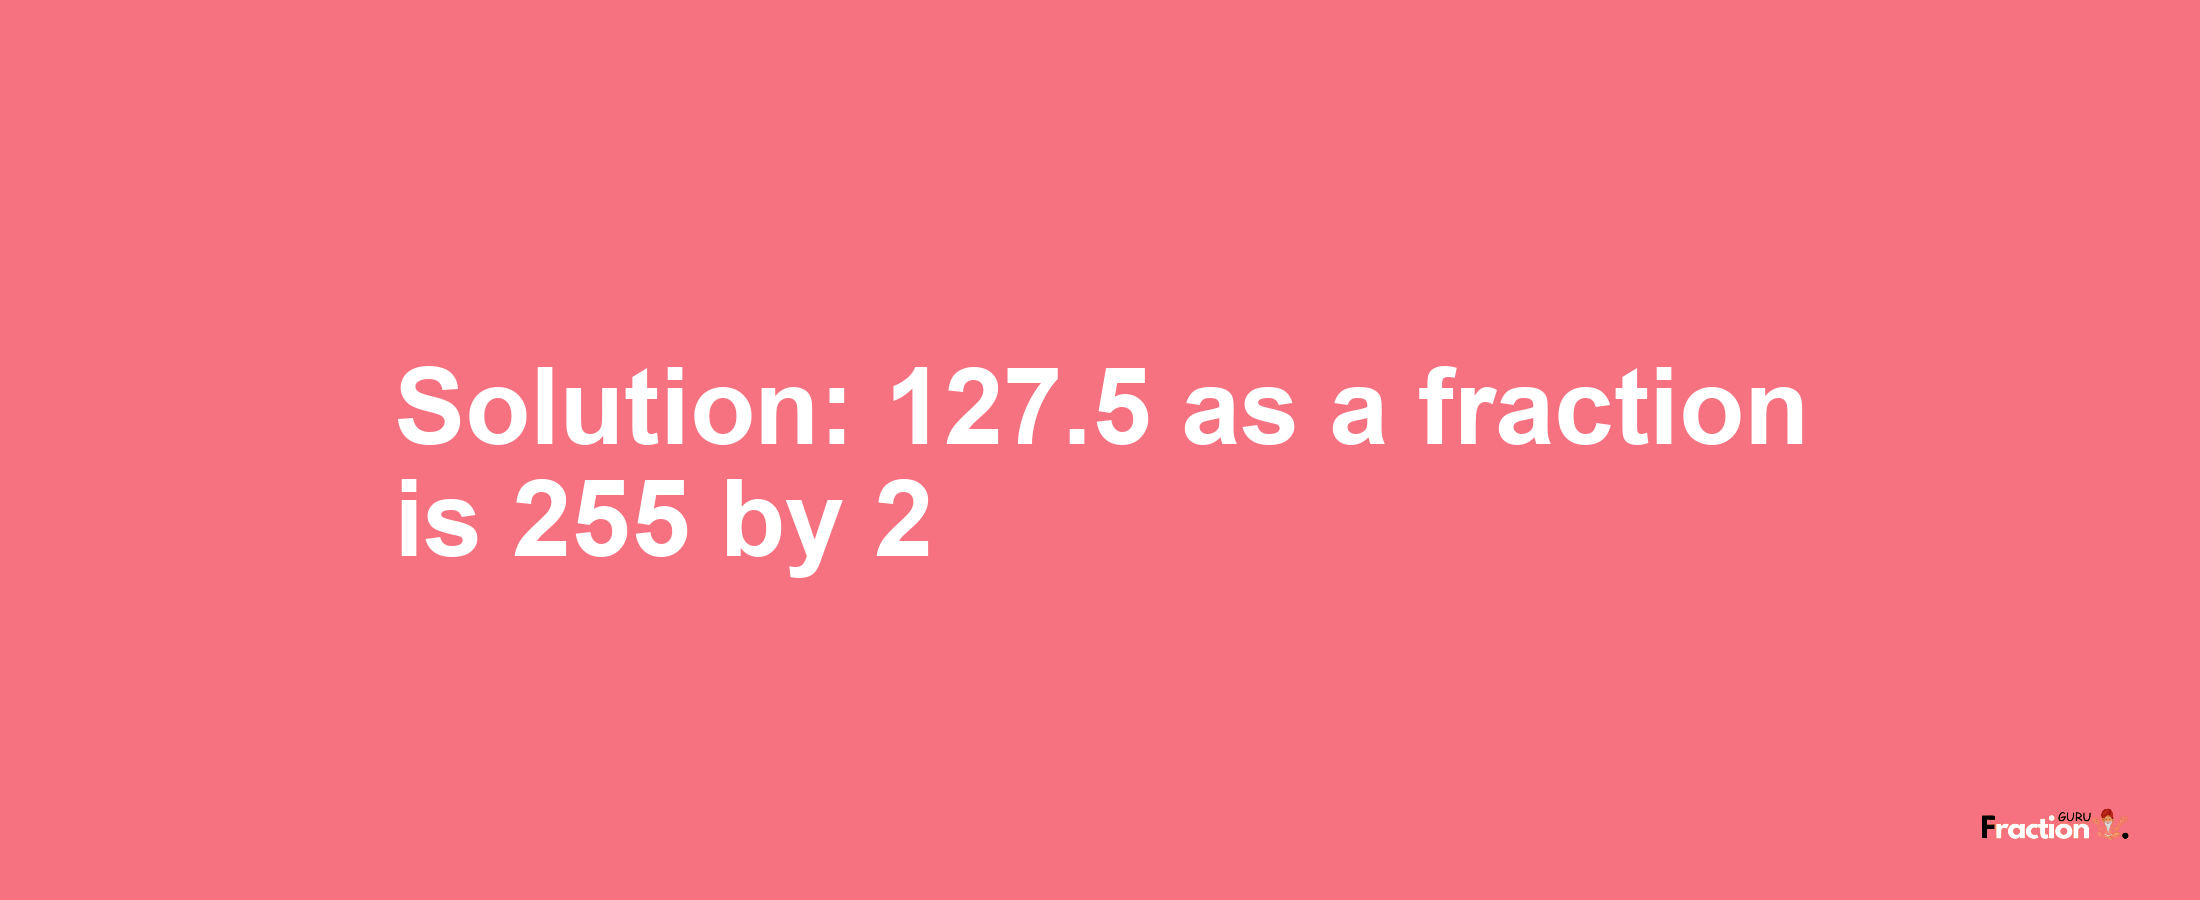 Solution:127.5 as a fraction is 255/2